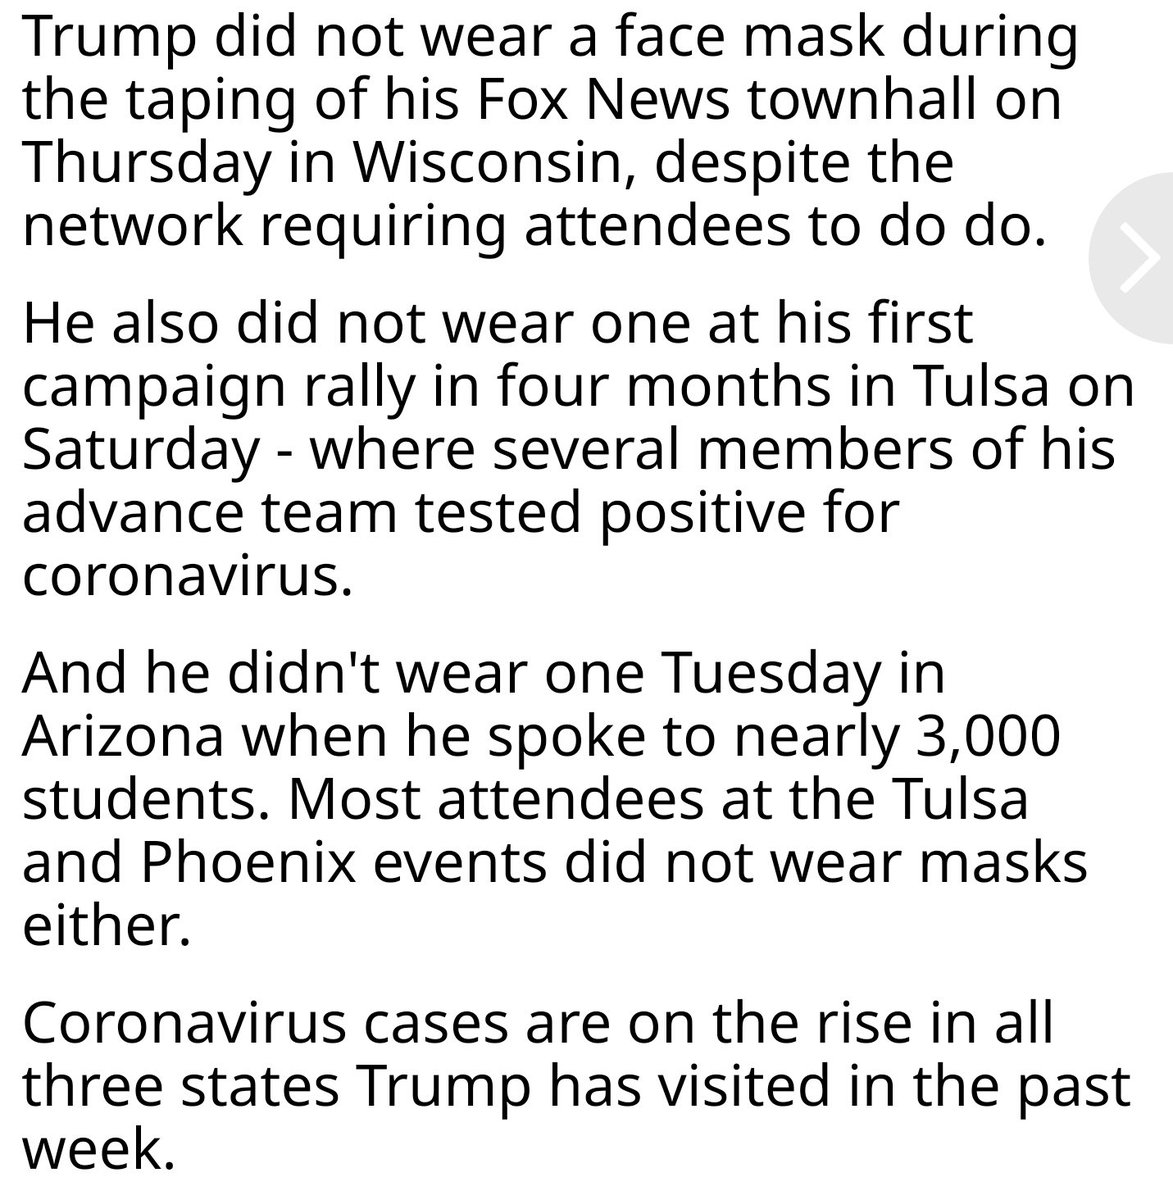 Adding to my thread #Republican senators now realize that  #Trump is gonna cause them to lose control of the SenateSo they're finally speaking out - ironically now that their states are spiking with the  #CoronaVirus - that everyone should wear a  #Mask https://twitter.com/Kristib43042441/status/1276566903662796801?s=19